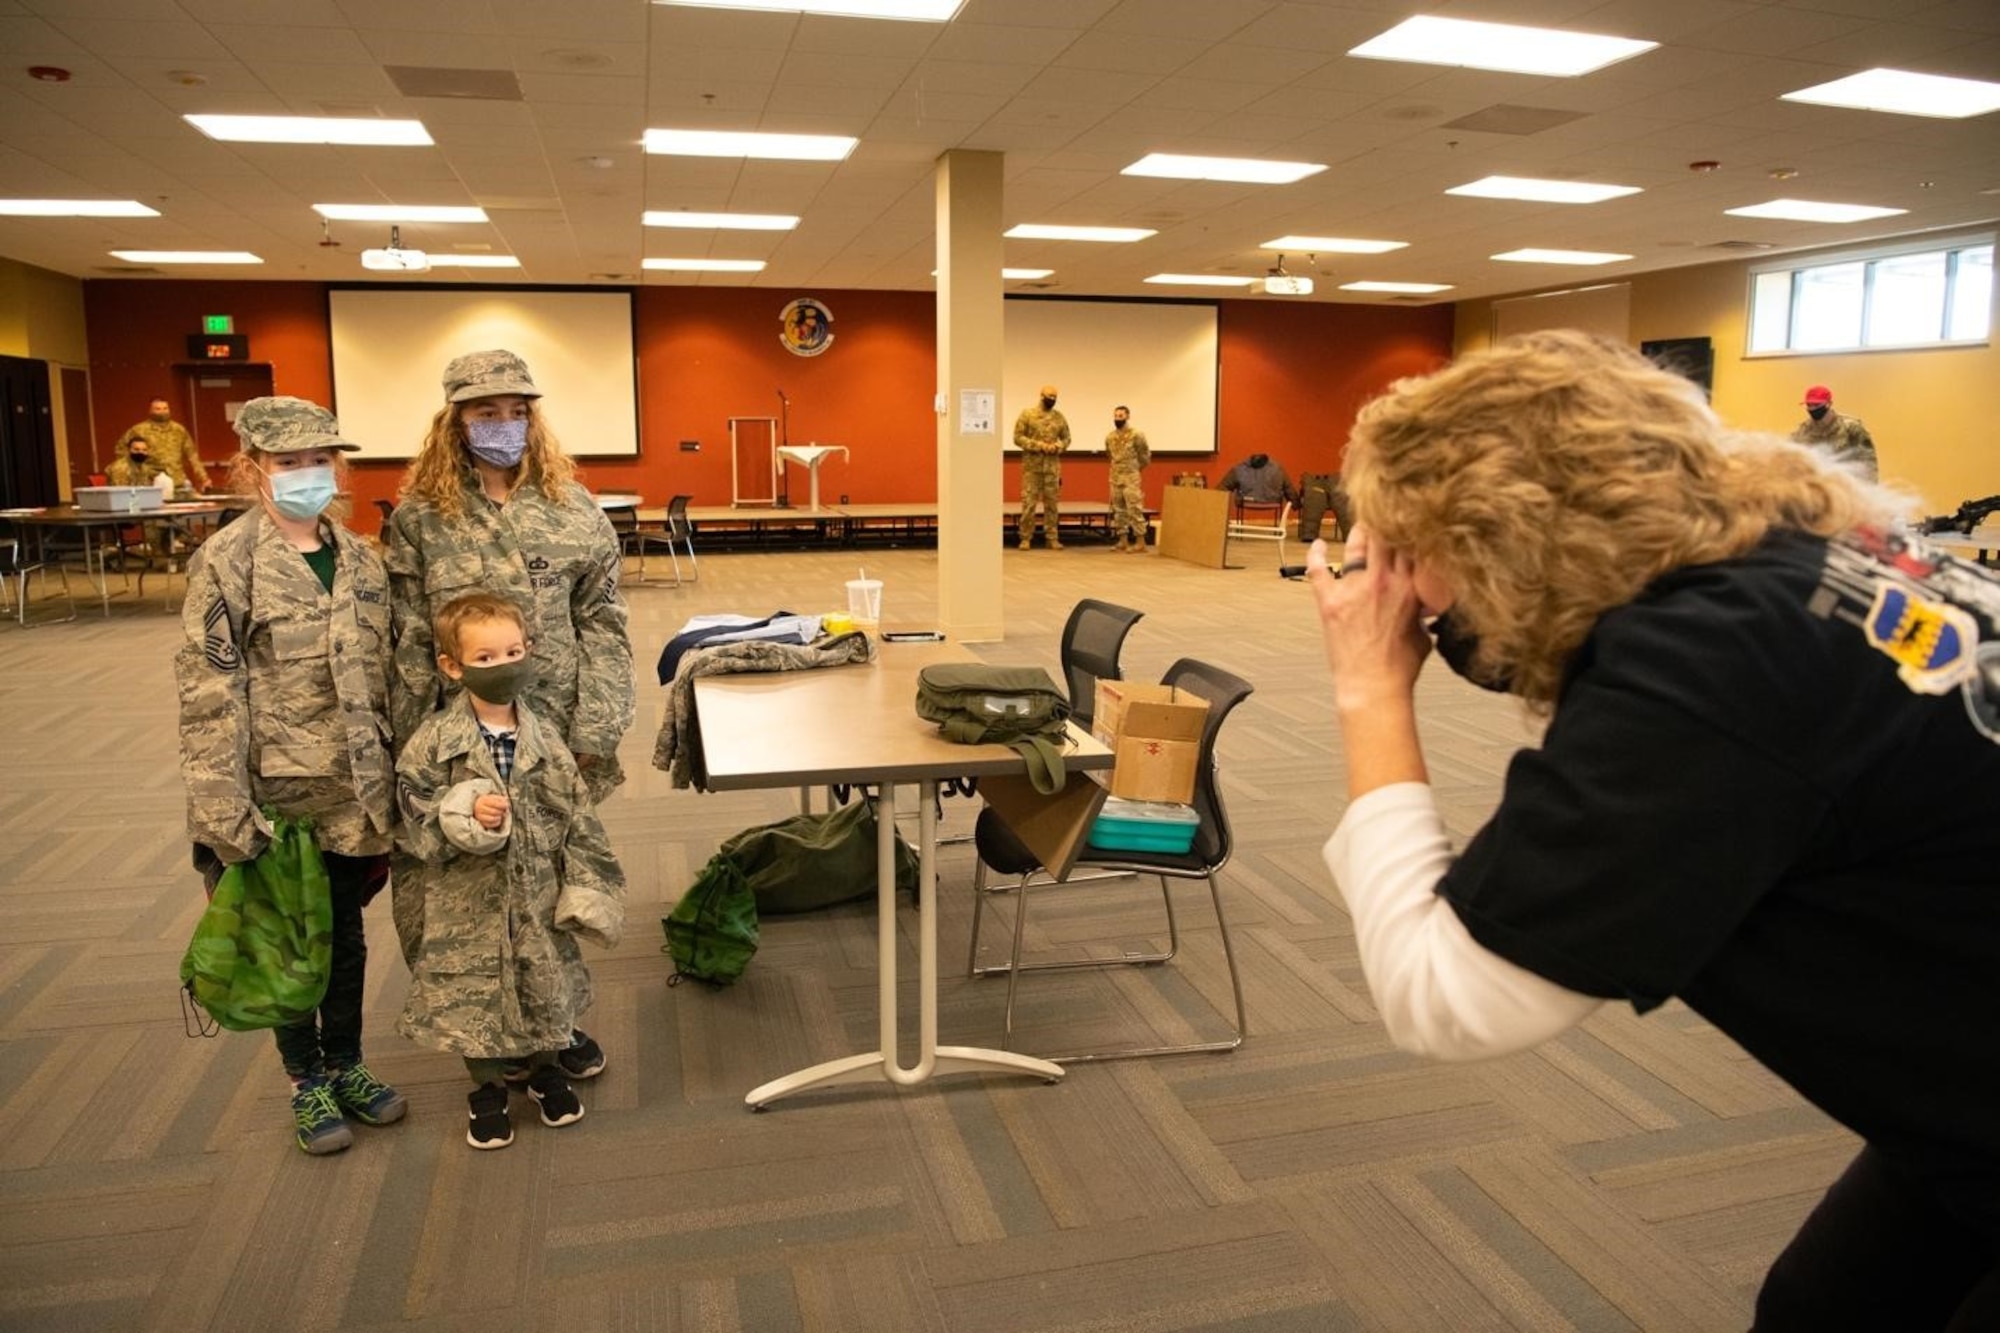 Military children pose for a photograph at the Kid’s Deployment Line event hosted by the Airman and Family Readiness Center at Ellsworth Air Force Base, S.D., April 17, 2021.